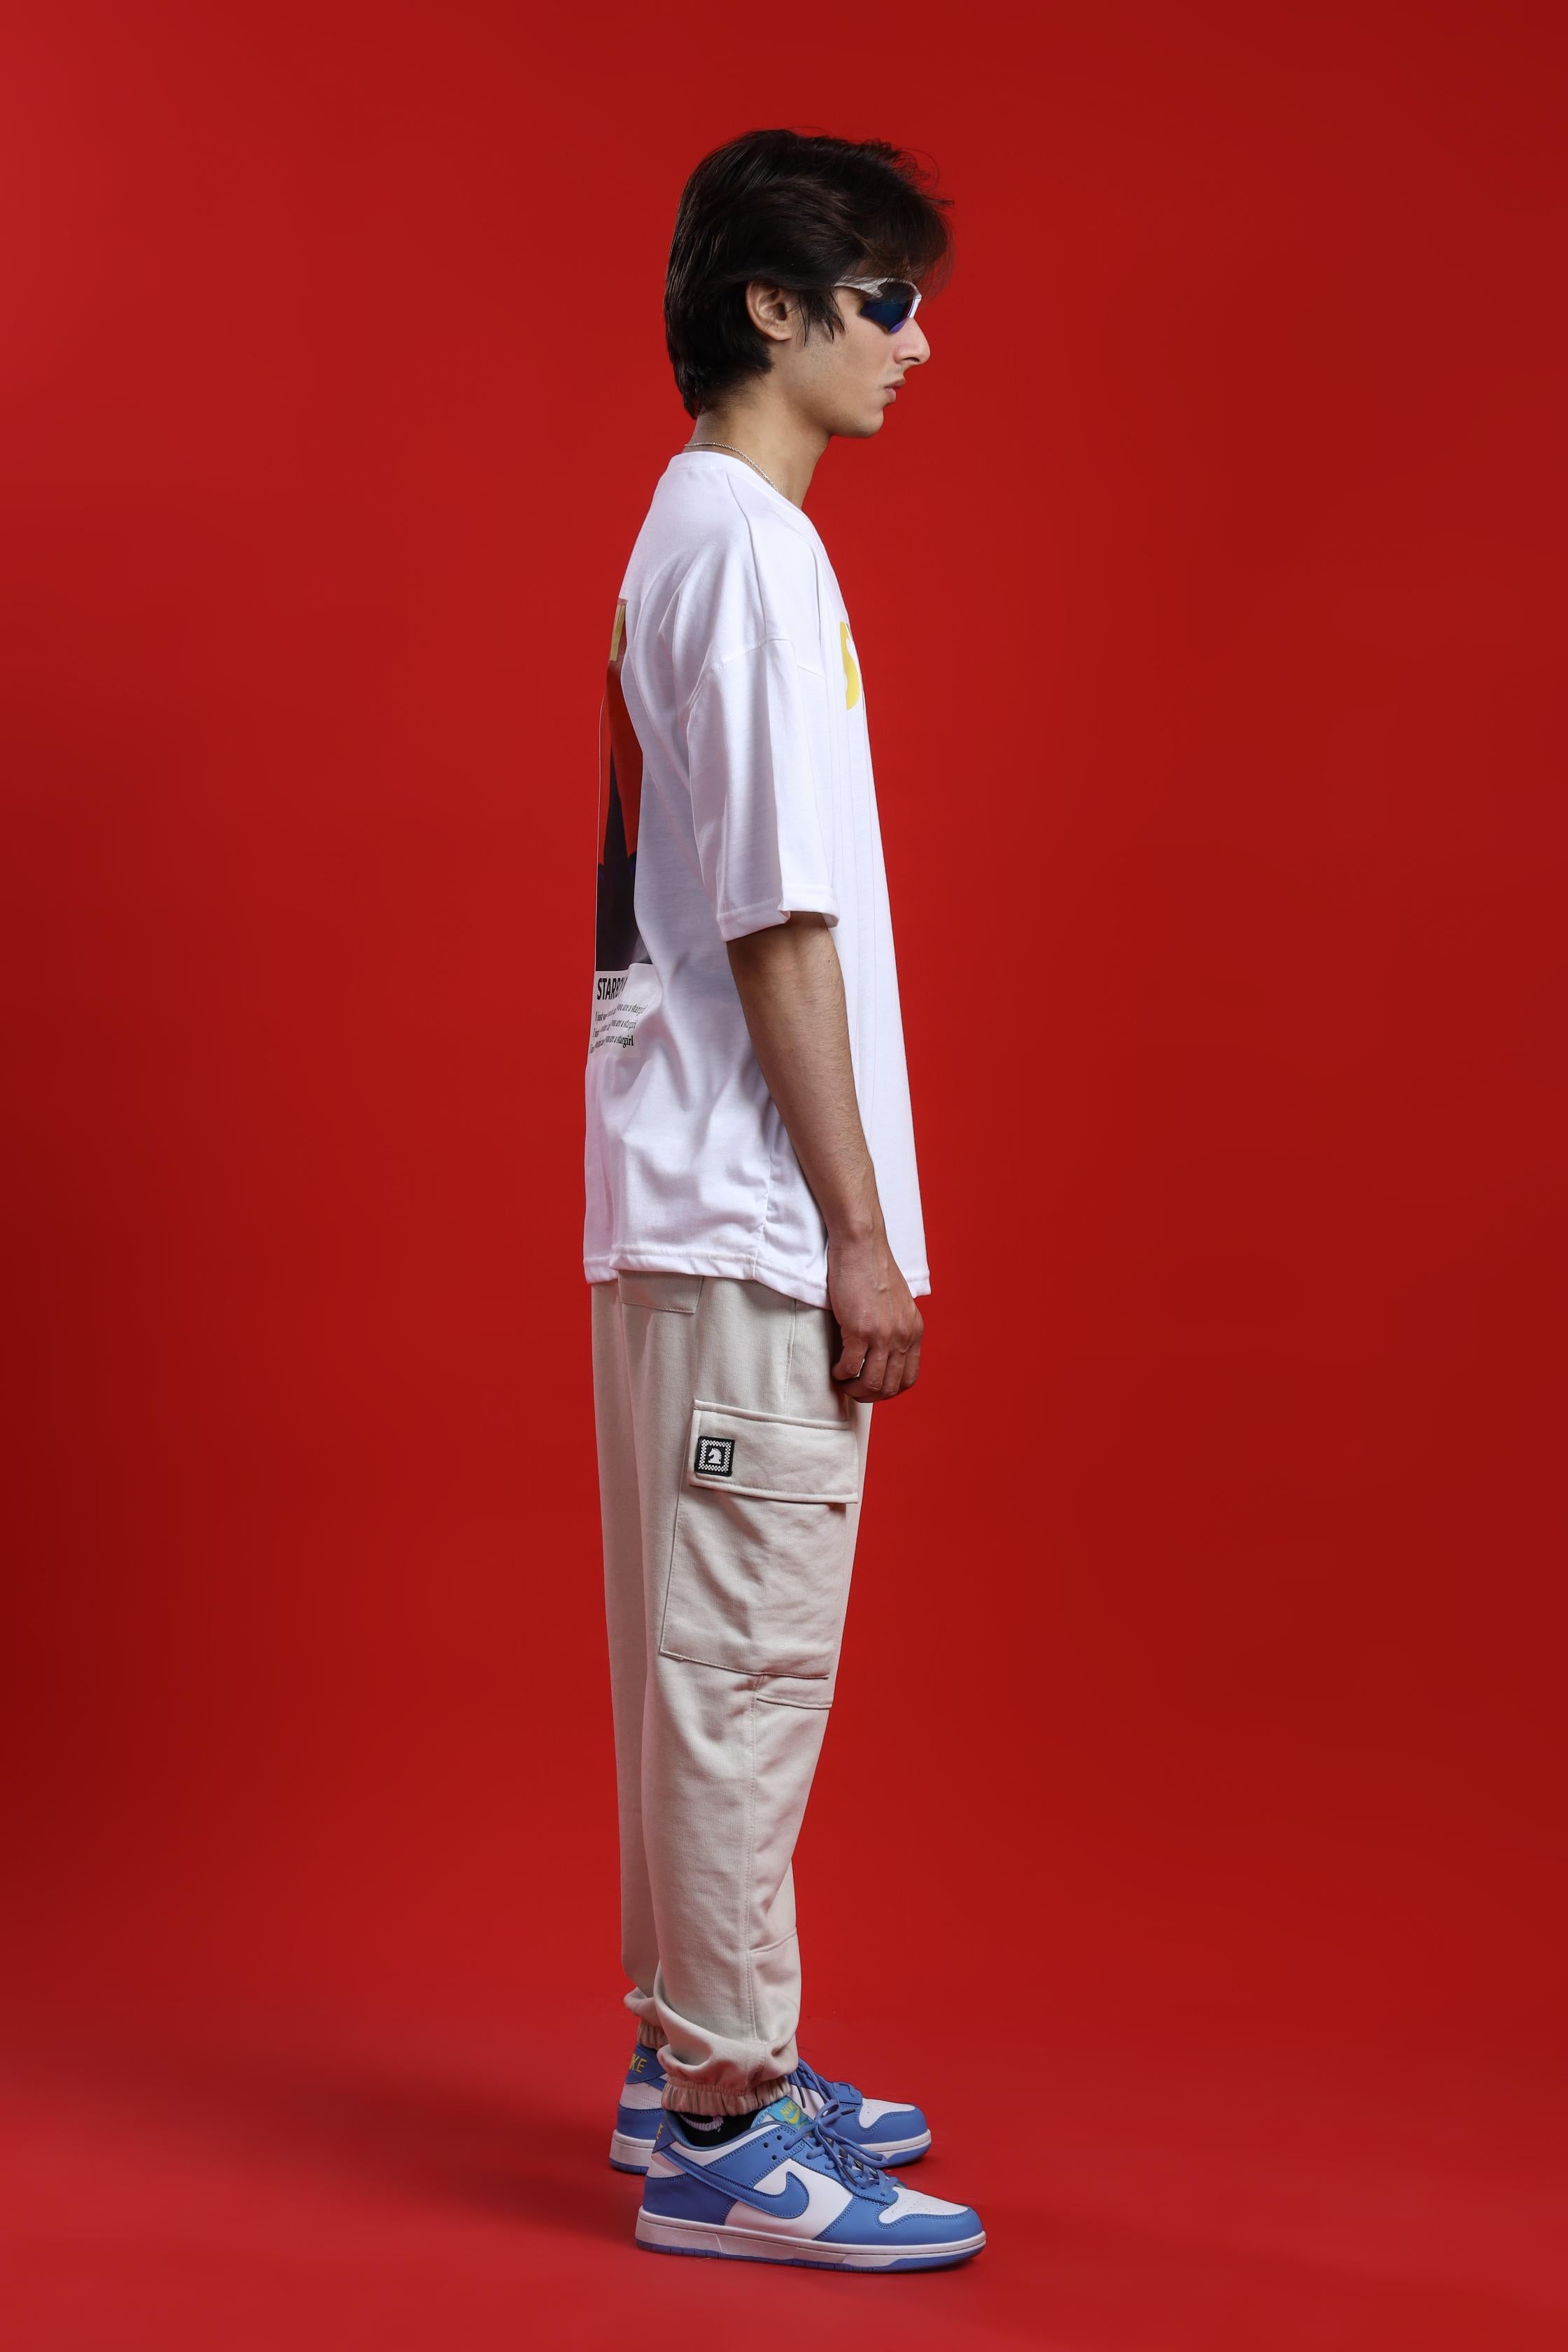 STAR BOY: I JUST WANNA OVERSIZED T-SHIRT - Shop Now - Checkmate Atelier